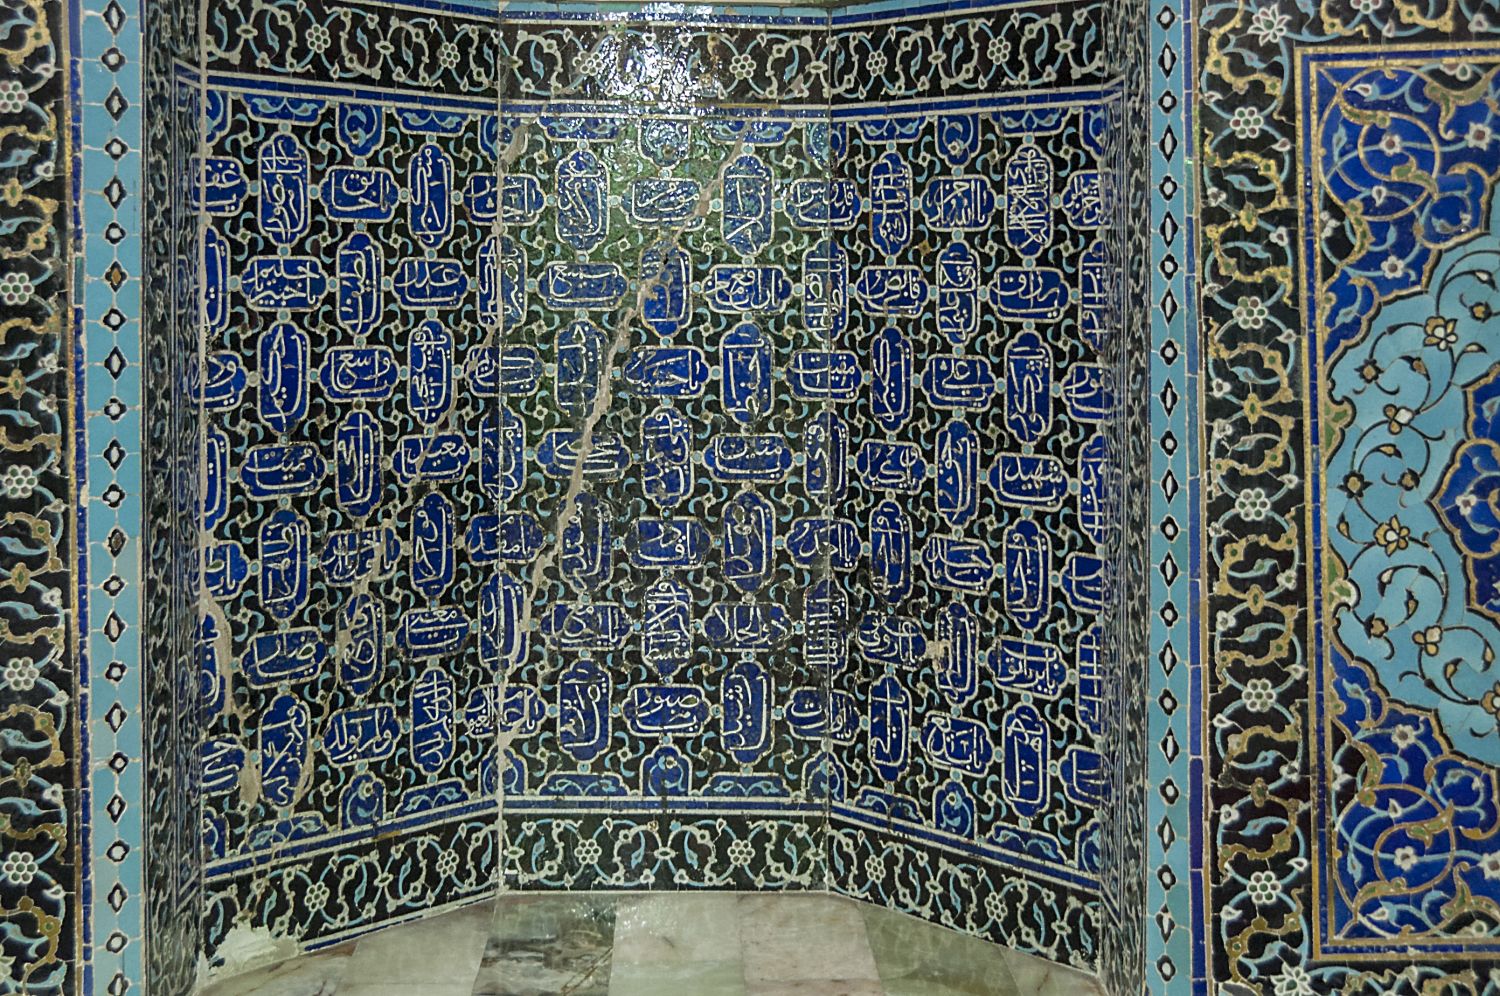 Inner tomb chamber, detail view of mihrab showing tilework.